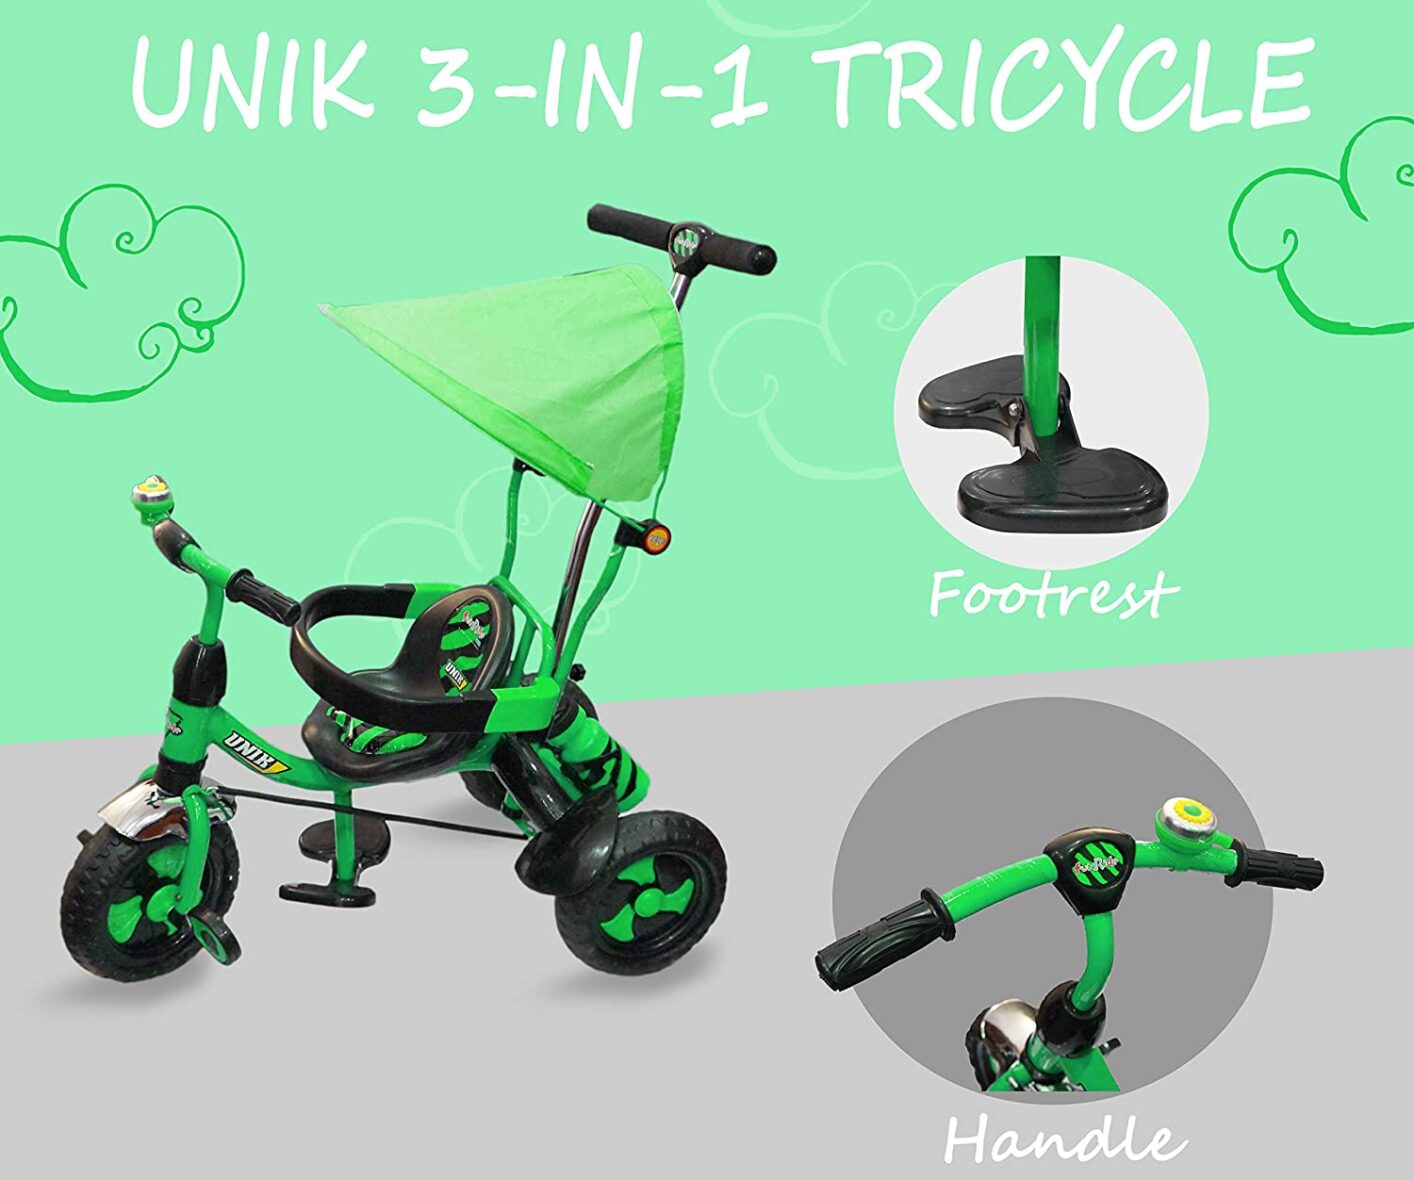 Fun Ride Baby Tricycle Unik Deluxe Rider 1 to 4 Years (7)